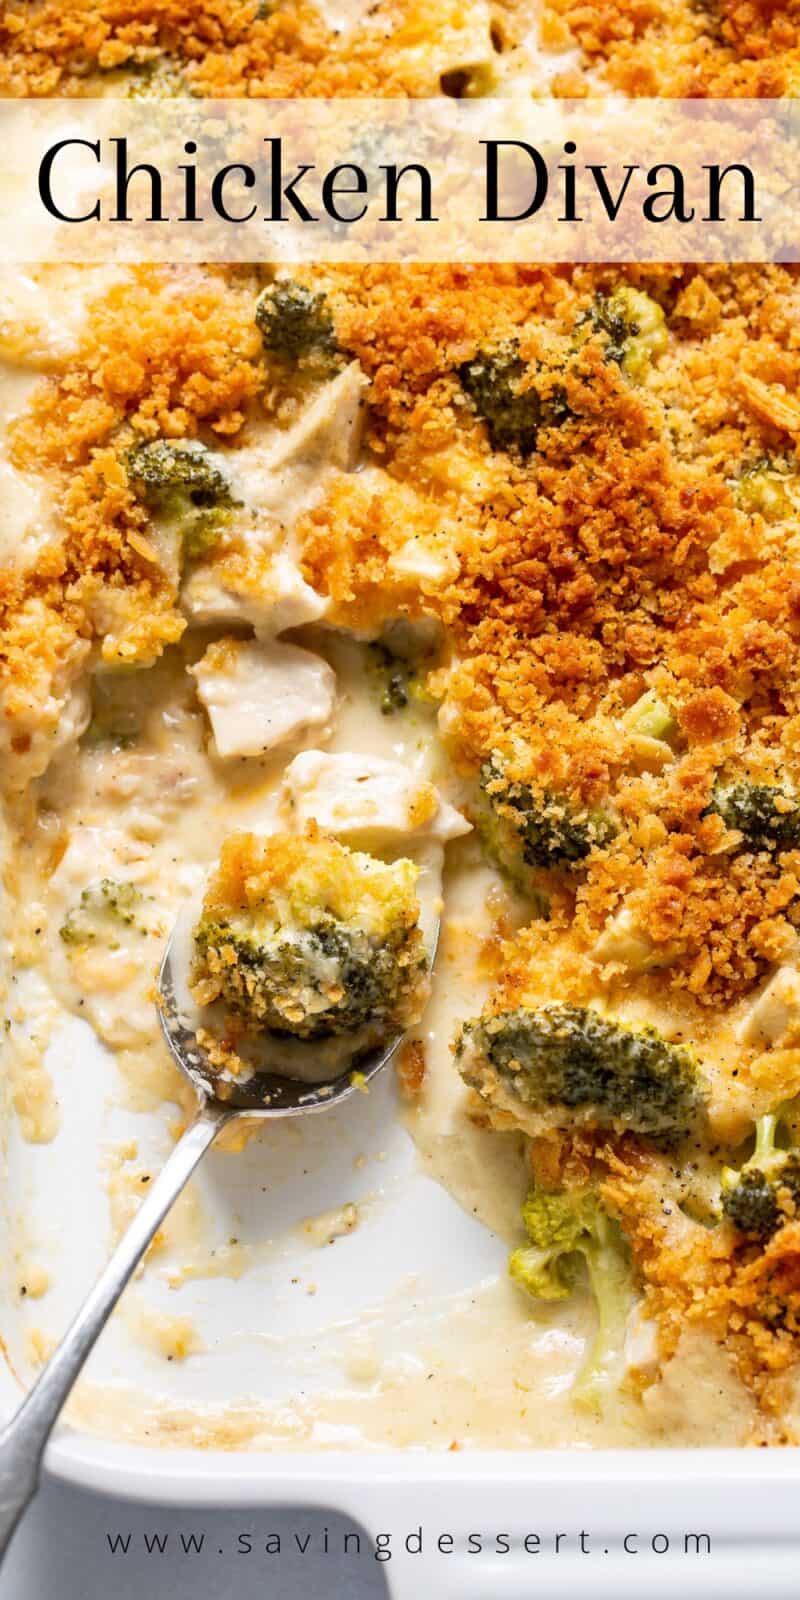 Overhead view of a casserole dish filled with chicken and broccoli topped with golden brown crushed crackers